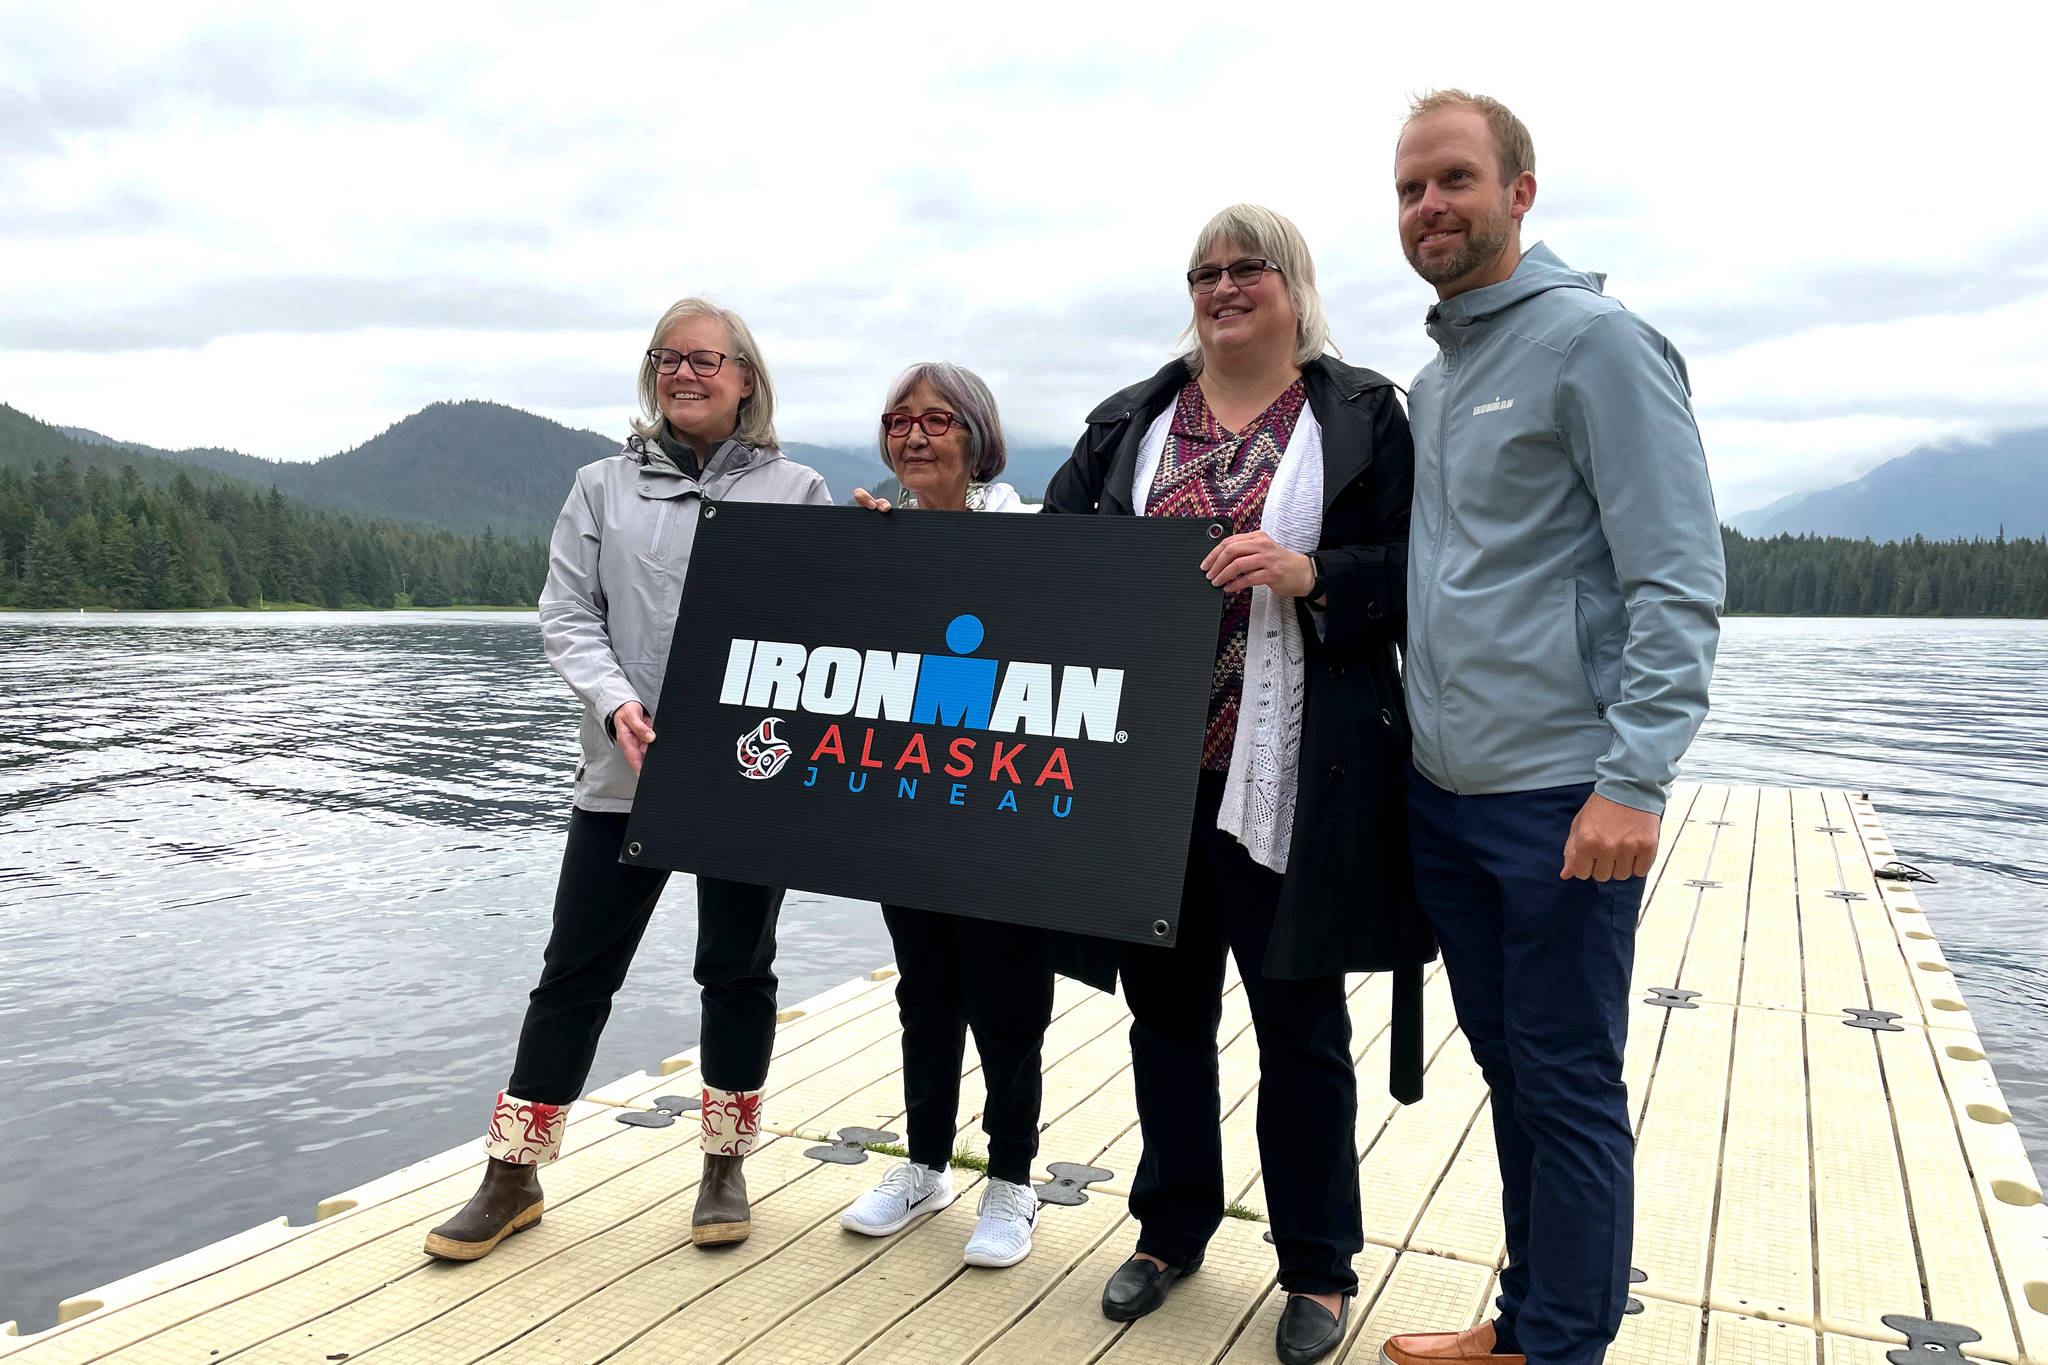 Travel Juneau CEO and President Liz Perry, Sealaska Heritage Institute President Rosita Worl, City and Borough of Juneau Mayor Beth Weldon, and Ironman regional director Dave Christen hold a sign for the 2022 Juneau Ironman event as they announce the race’s Alaska debut on the University of Alaska- Southeast campus on Aug. 9, 2021. (Michael S. Lockett / Juneau Empire)